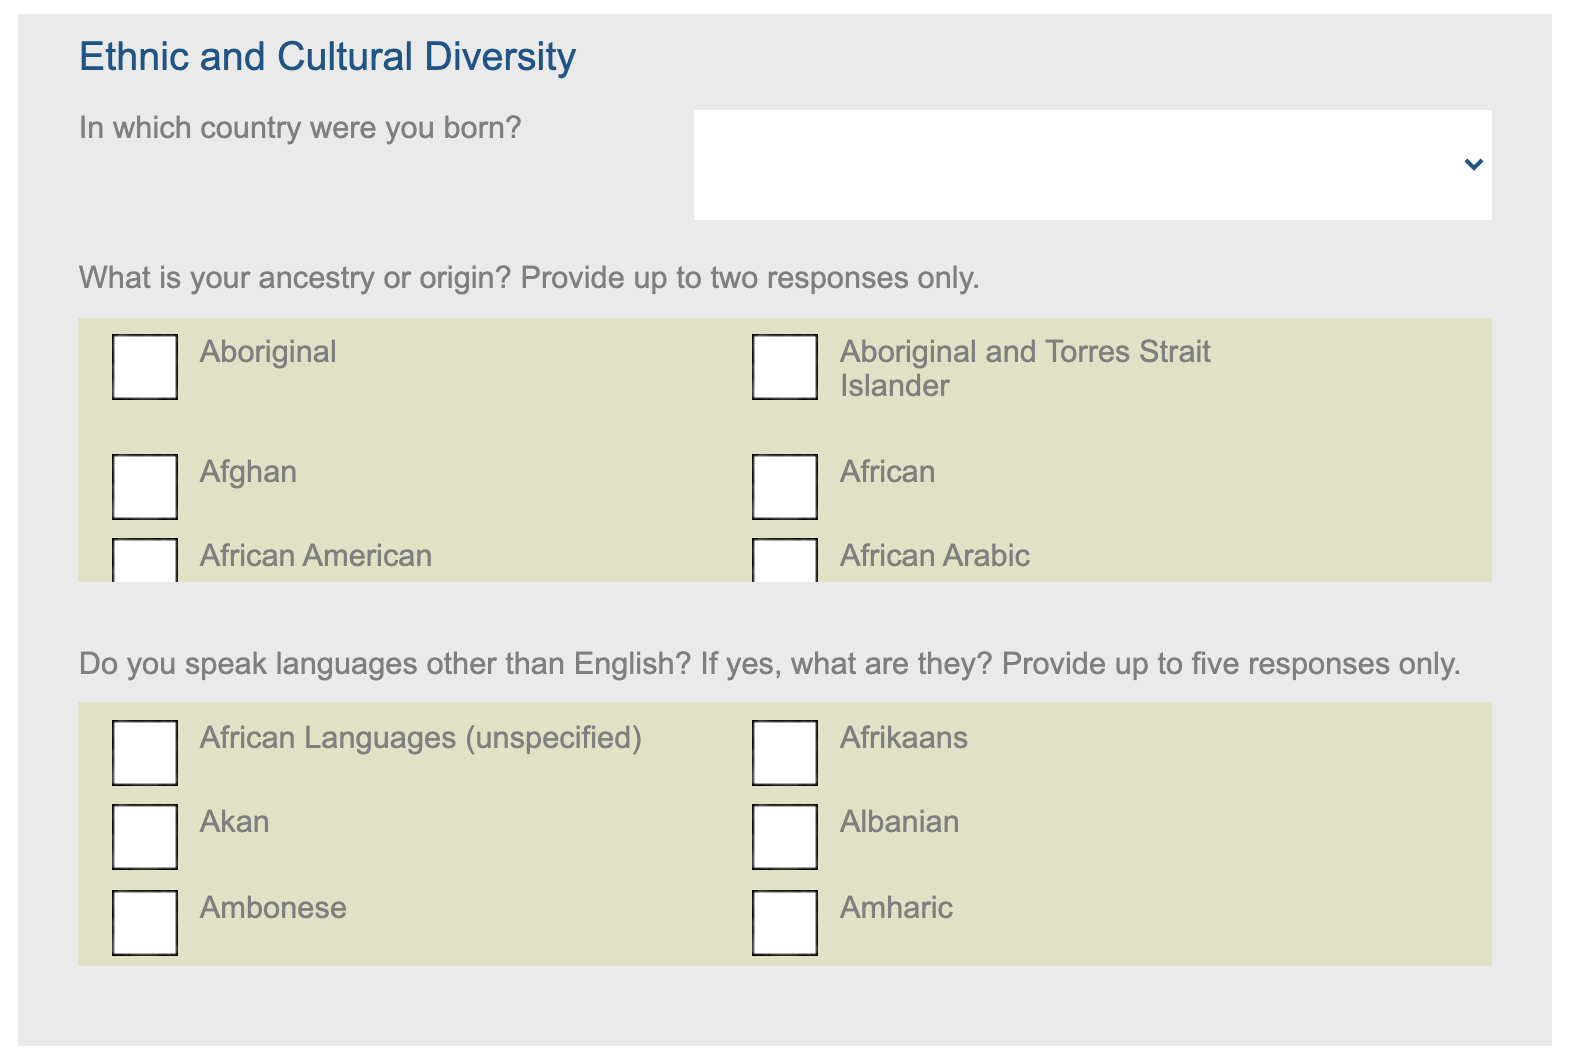 Ethnic and cultural diversity